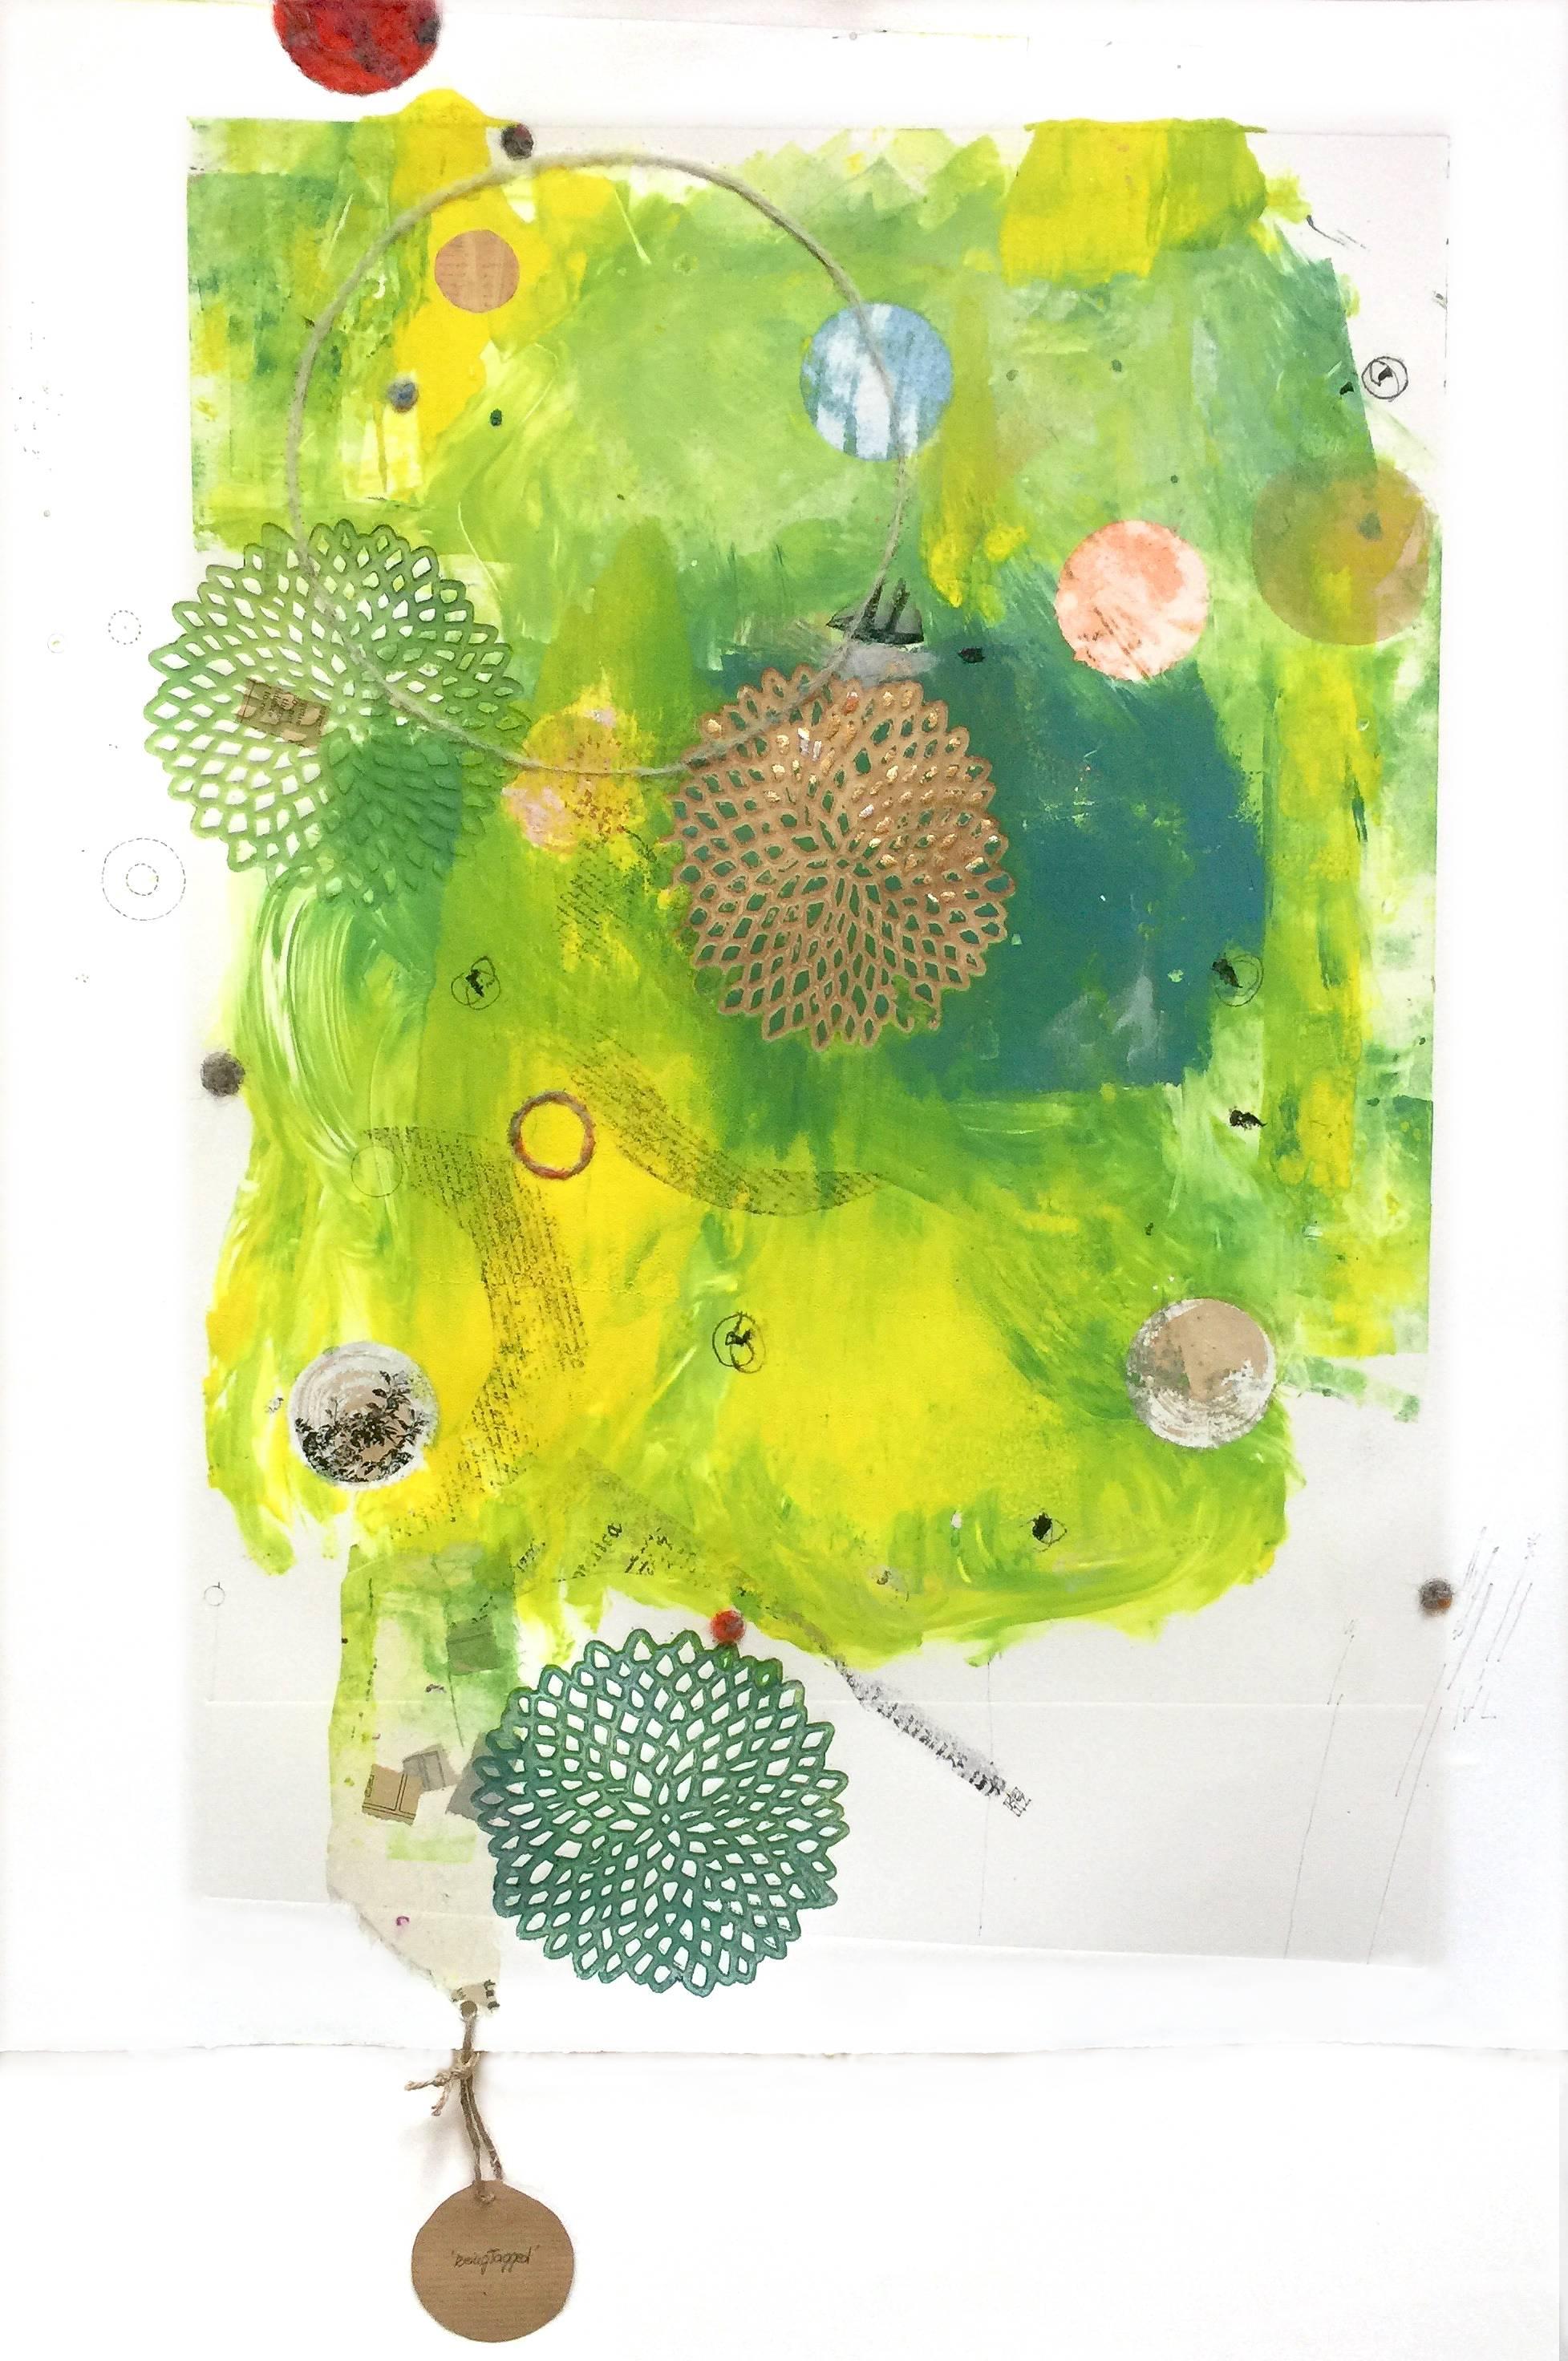 Karin Bruckner Abstract Print - BeingTagged, mixed media, 22 x 30 inches. Neon, abstracted work